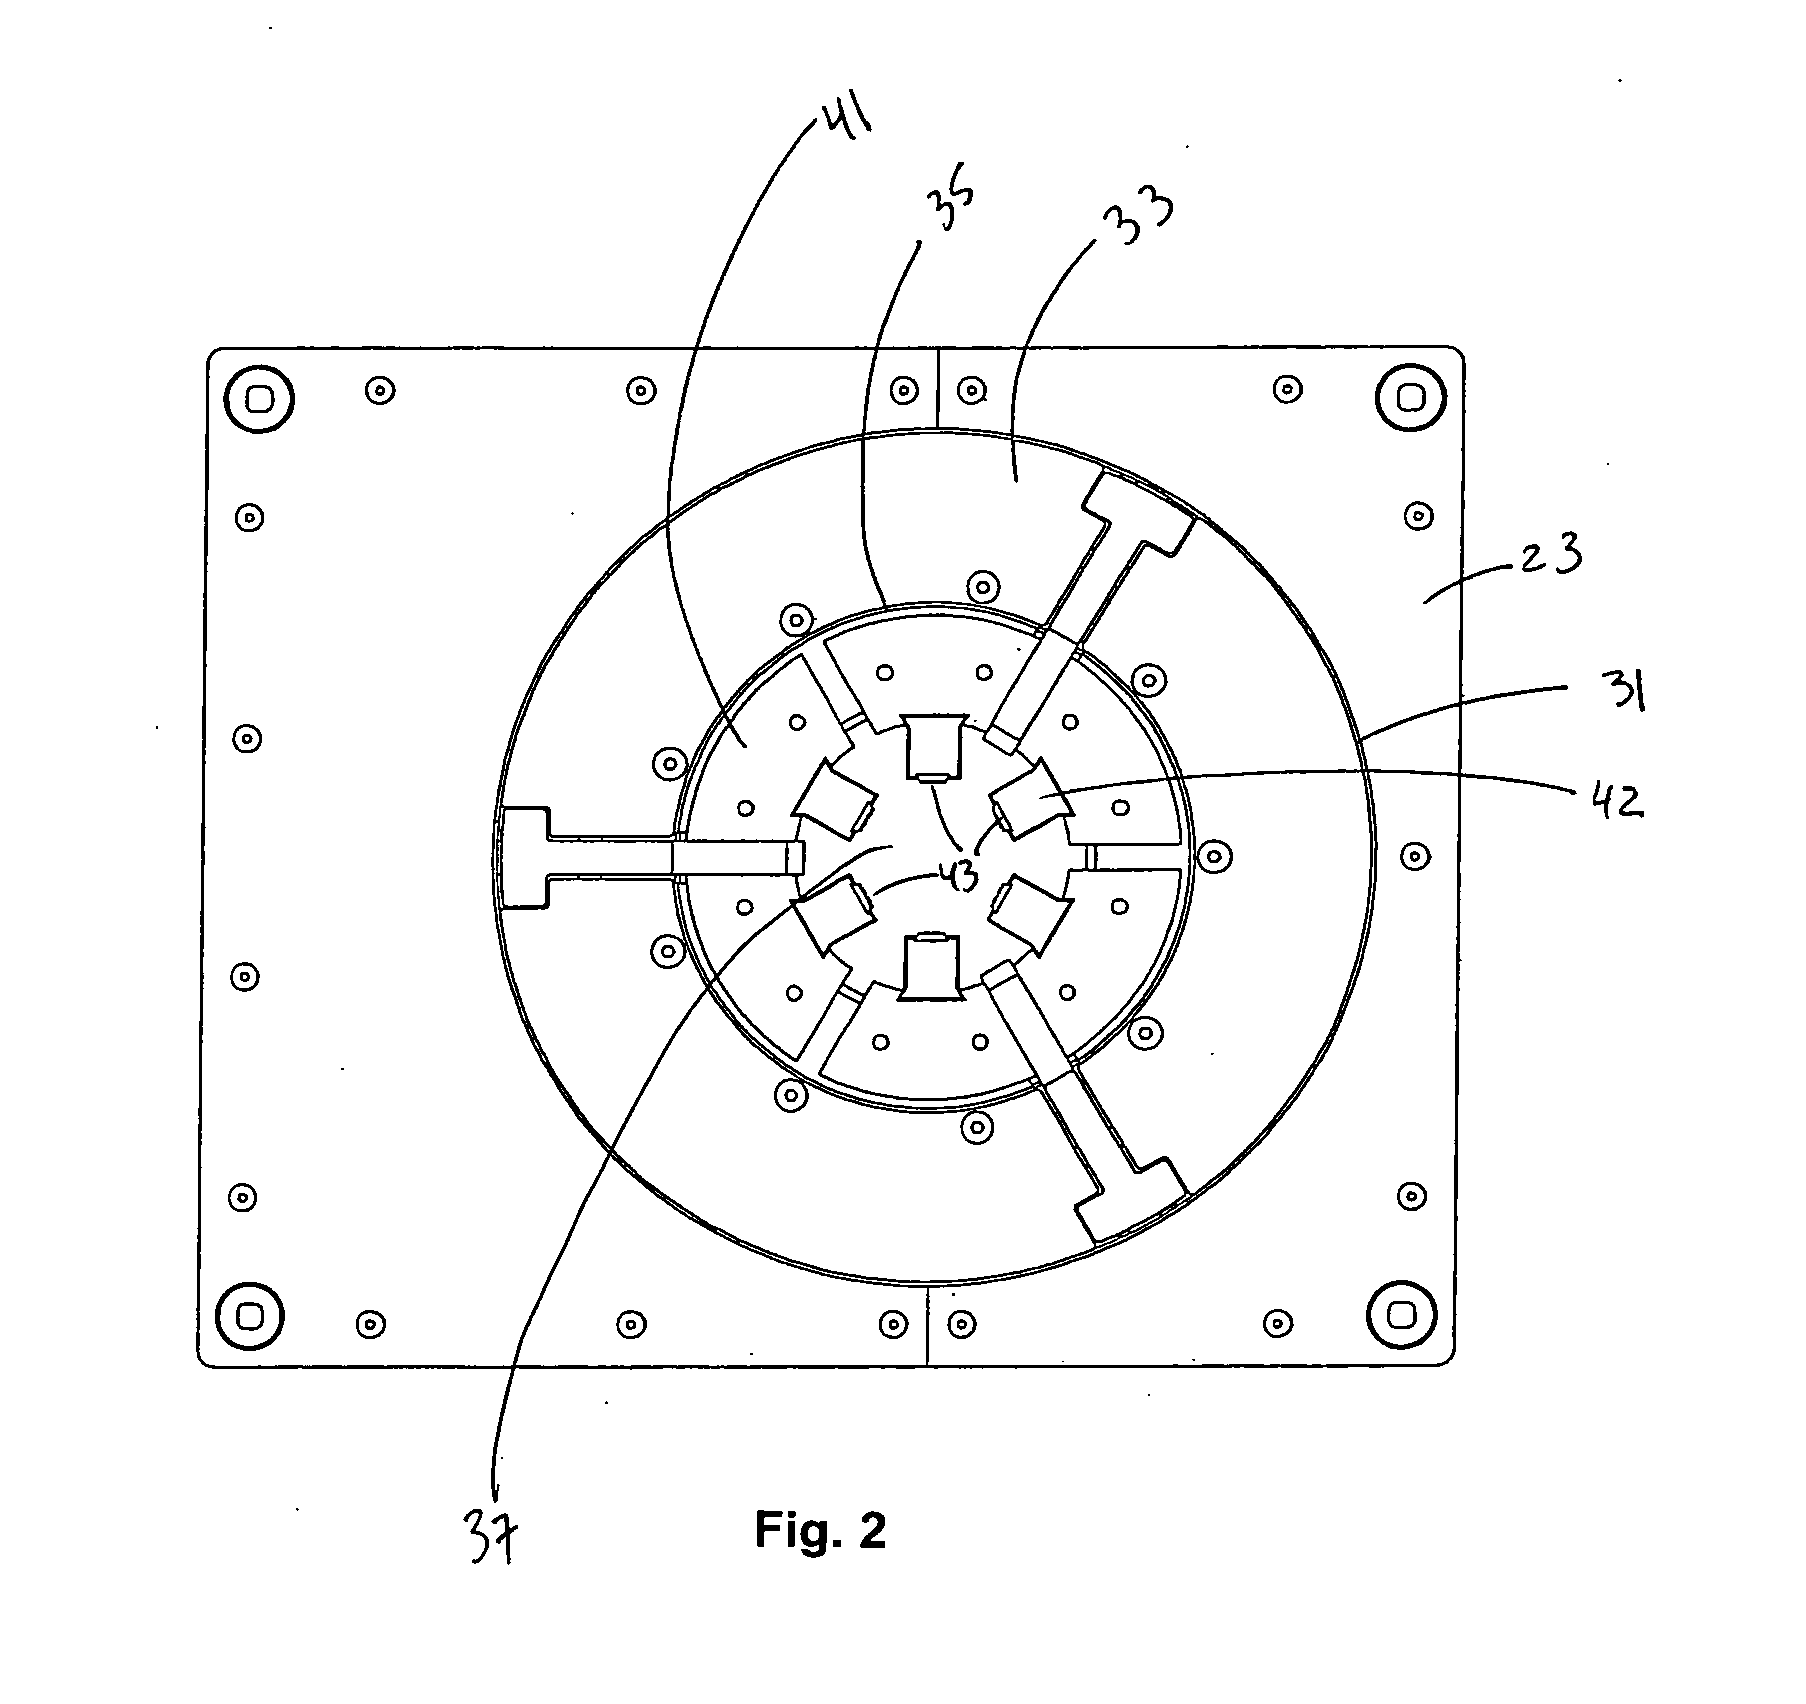 Mouse hole support unit with rotatable or stationary operation